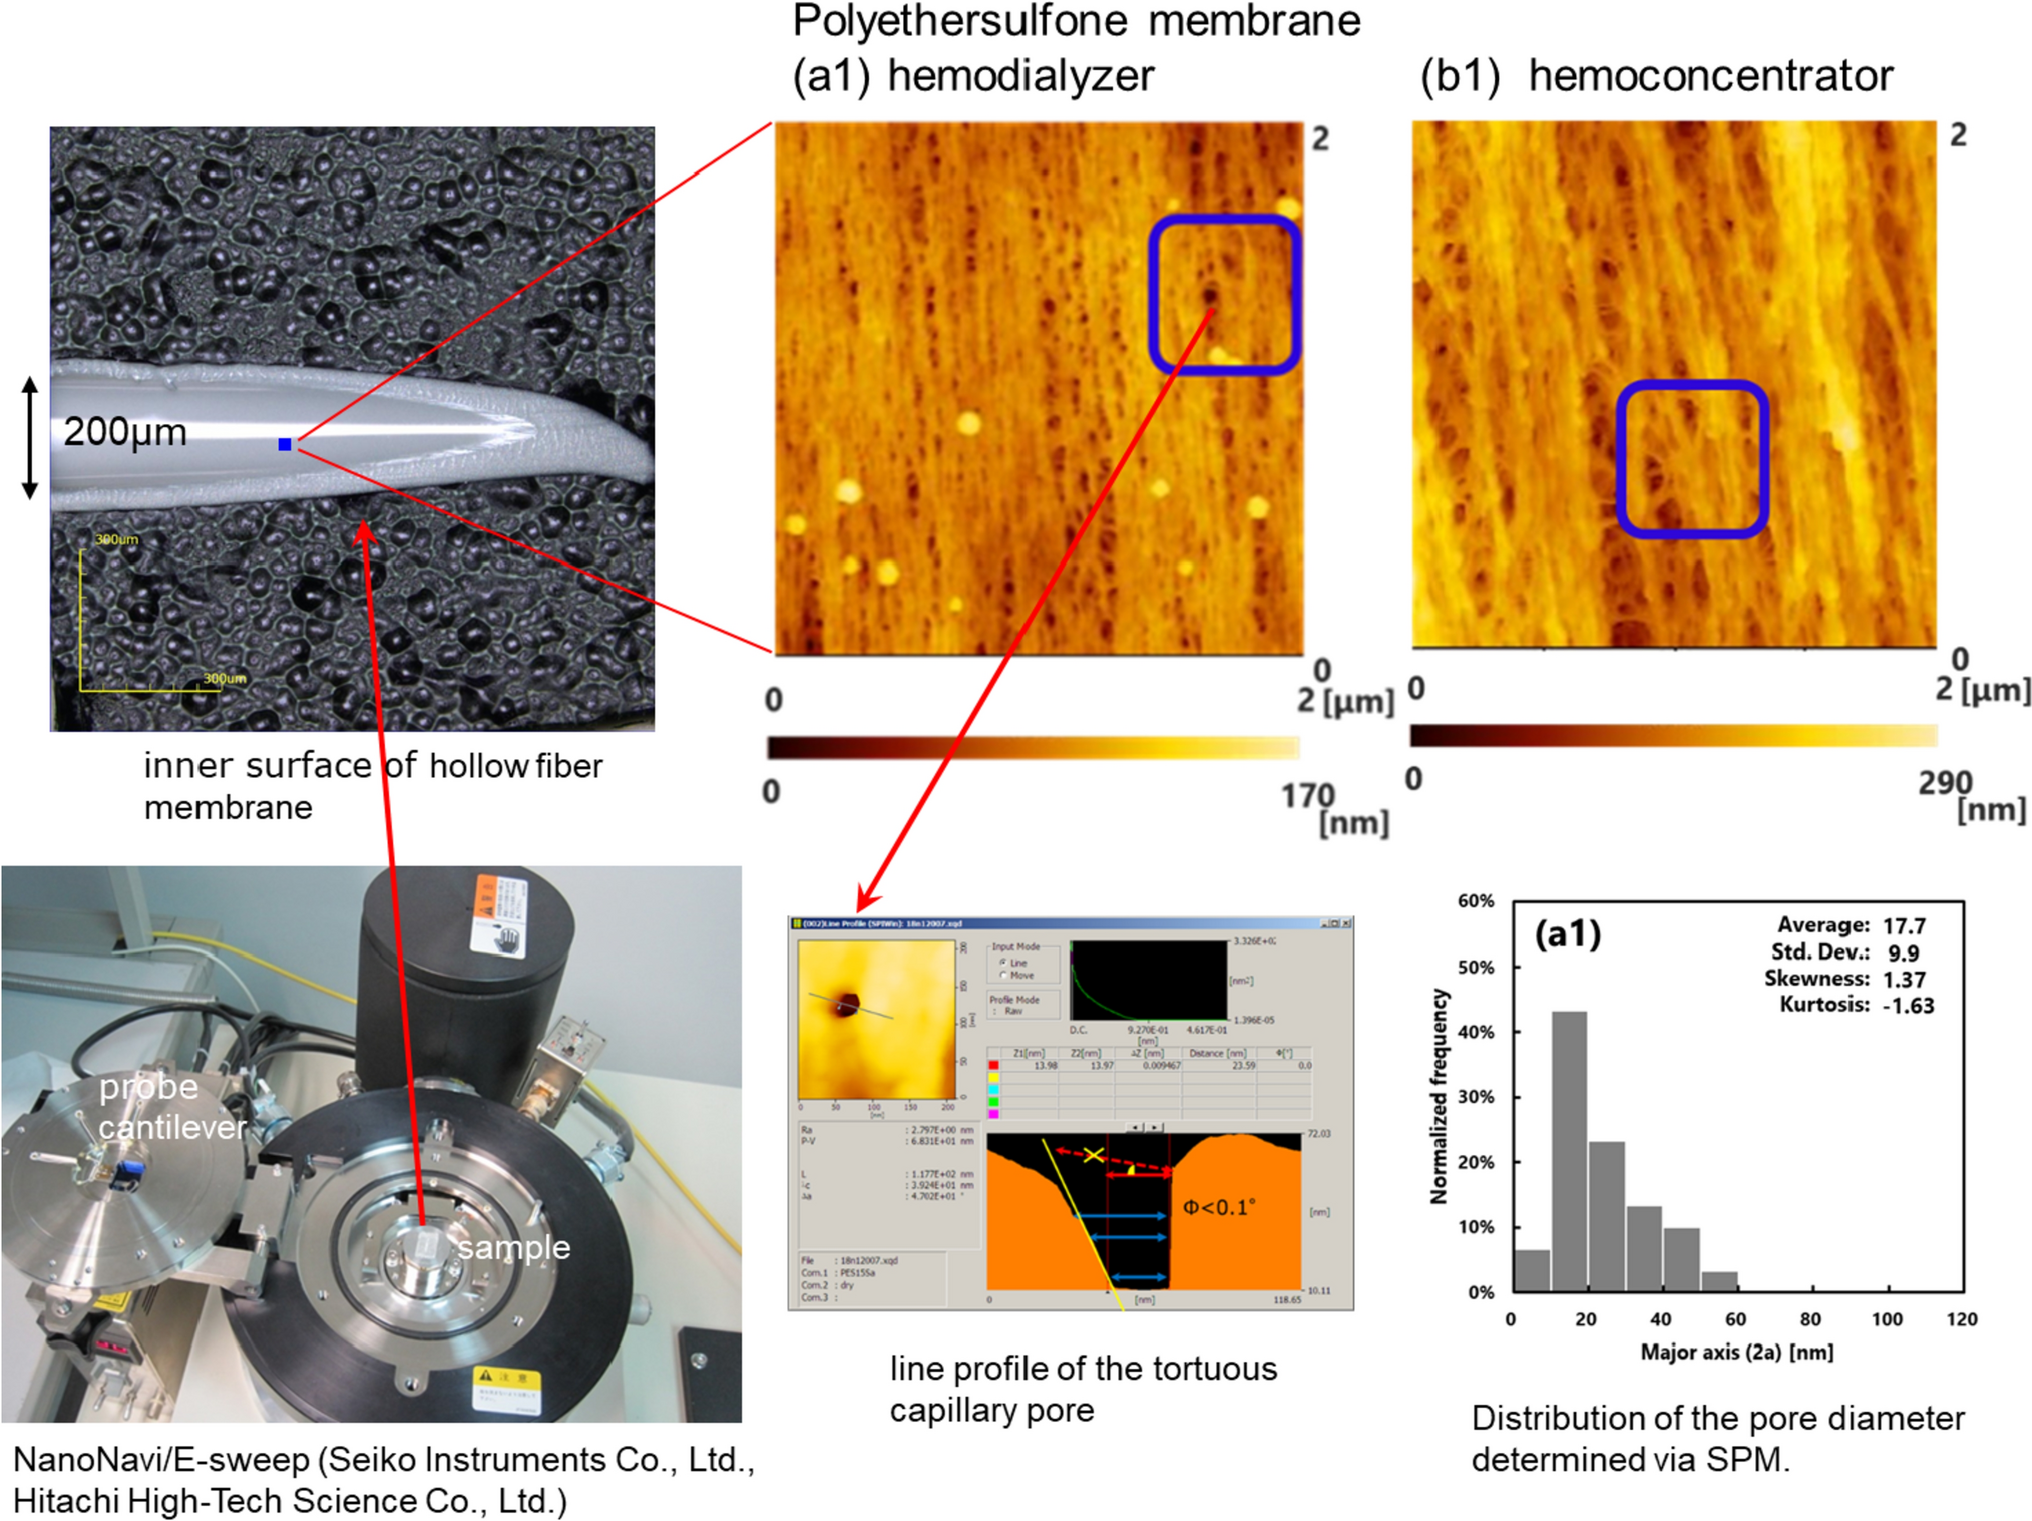 3D porous structure imaging of membranes for medical devices using scanning probe microscopy and electron microscopy: from membrane science points of view